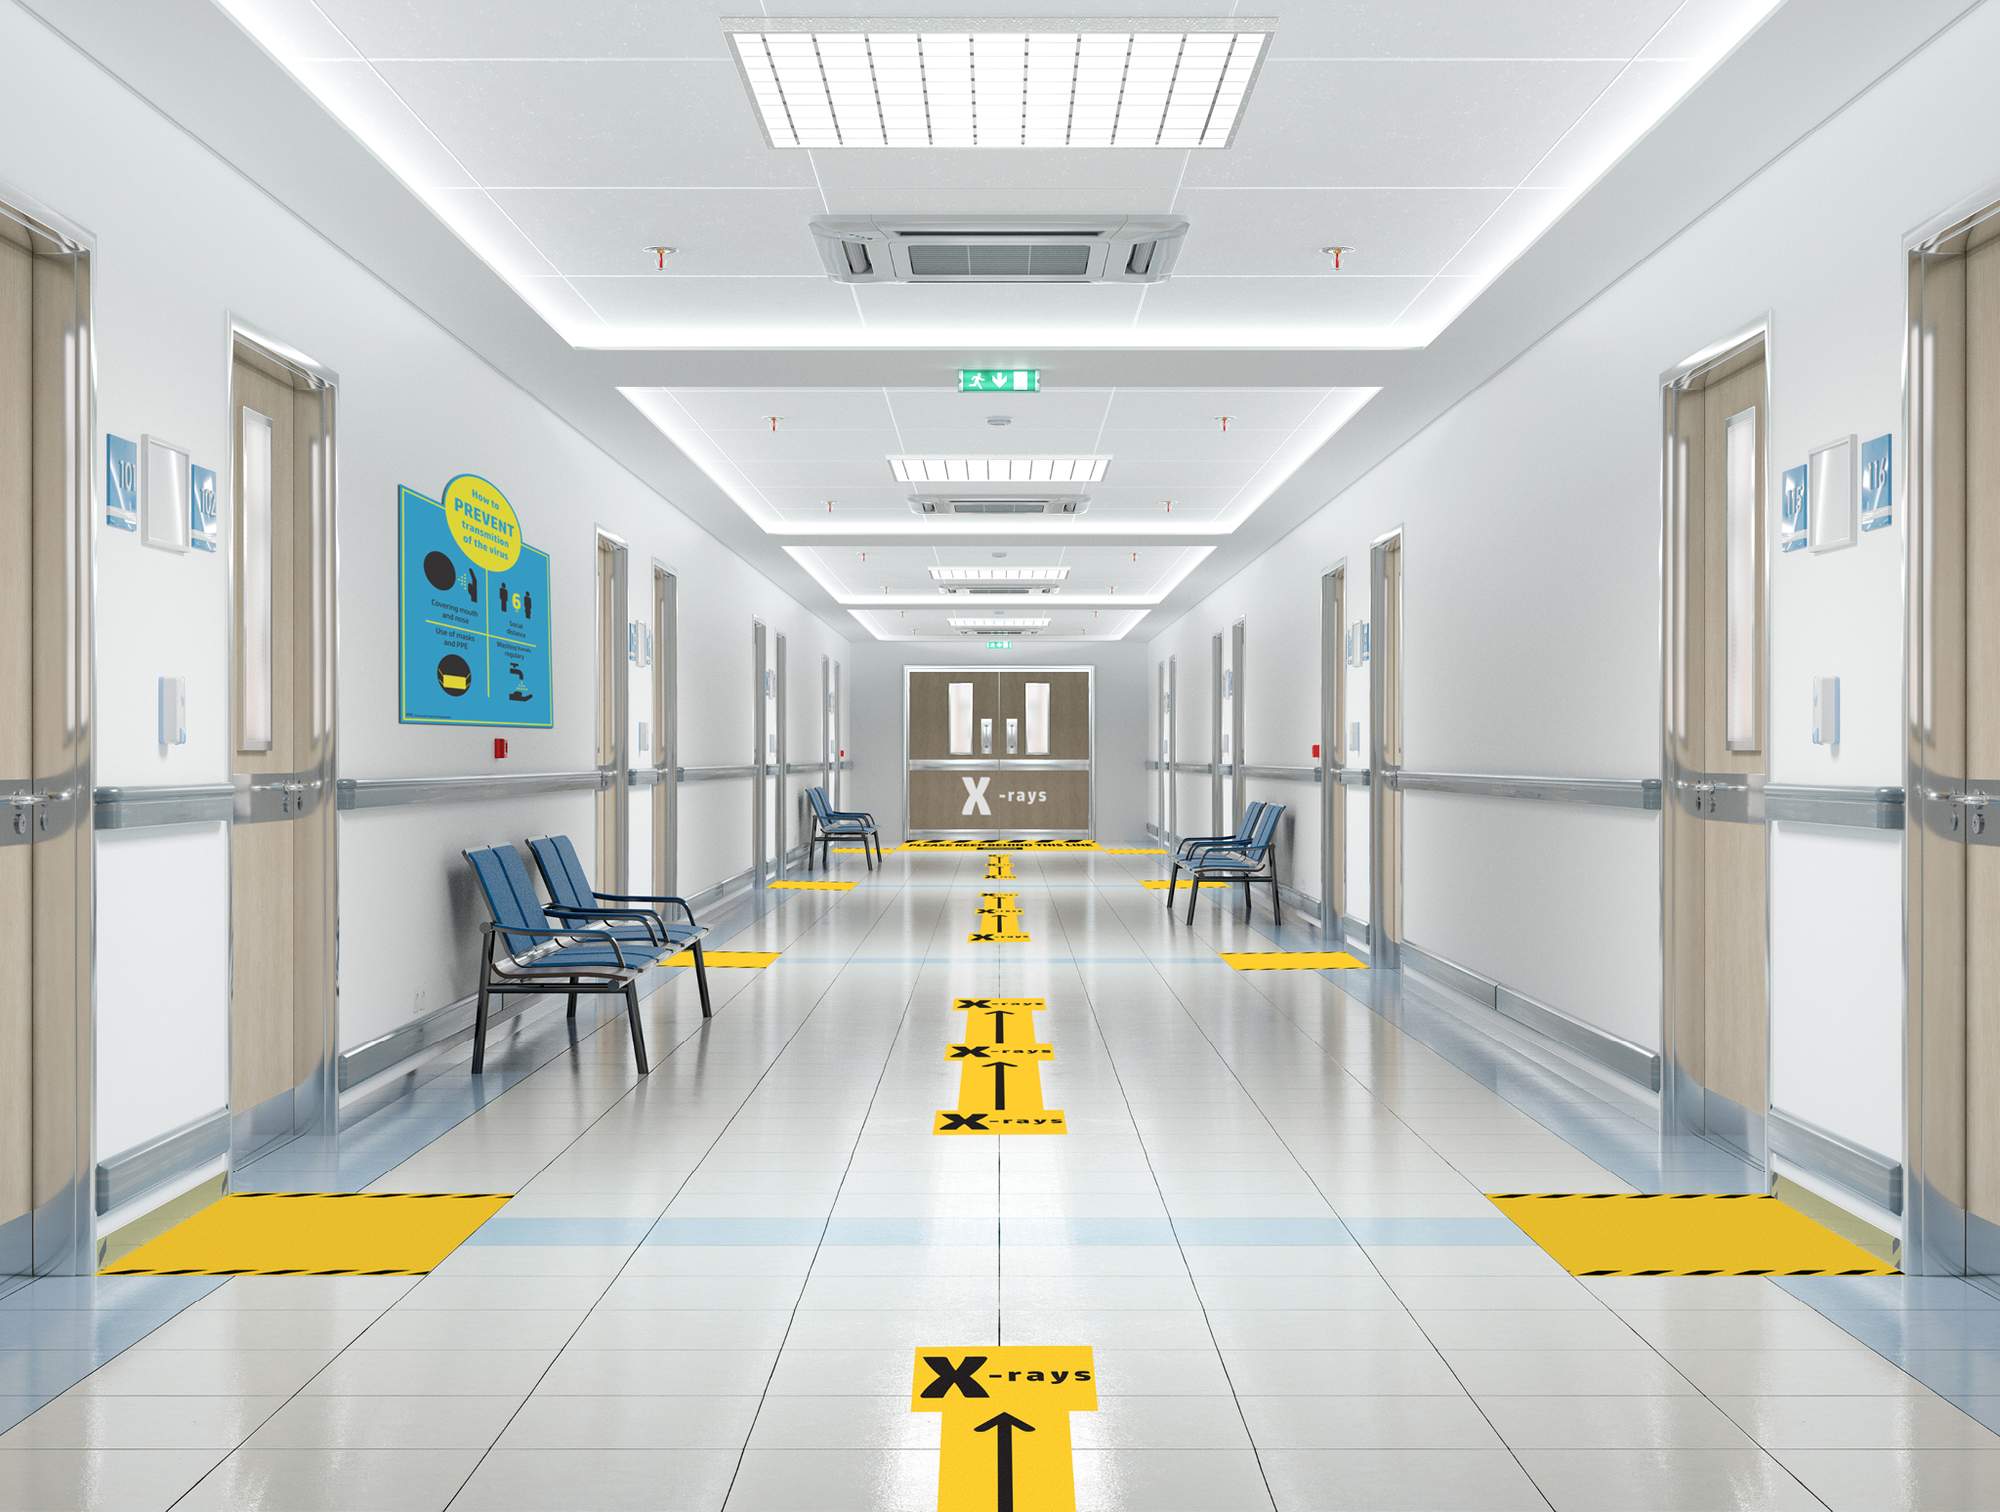 The 10 dos and don’ts of wayfinding floor signage